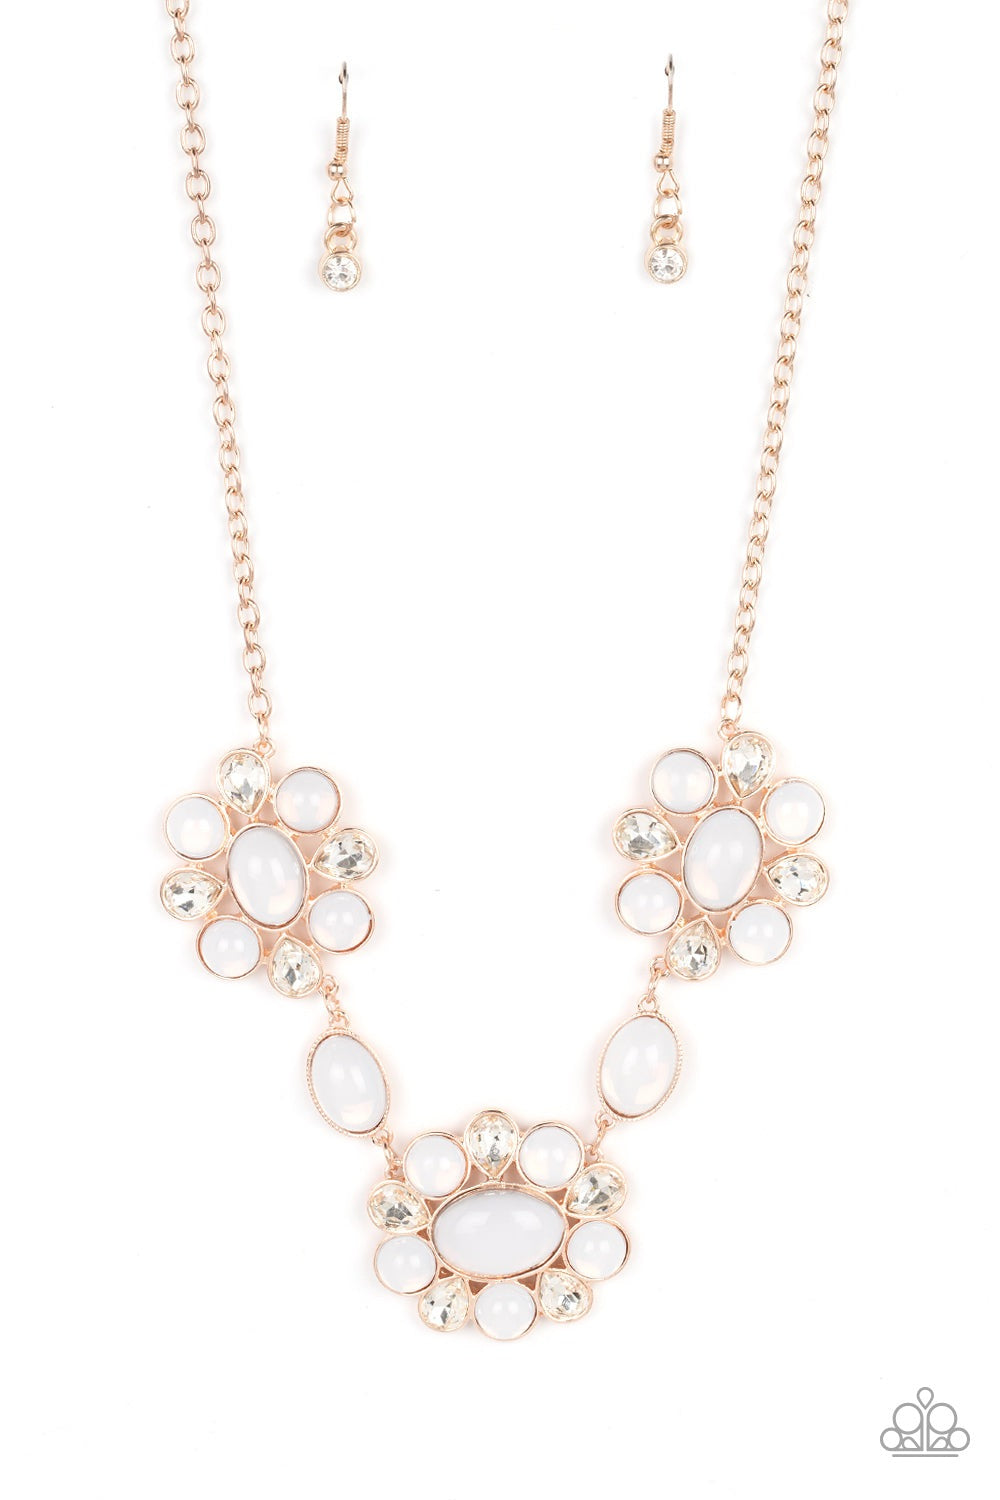 YOUR CHARIOT AWAITS ROSEGOLD-NECKLACE